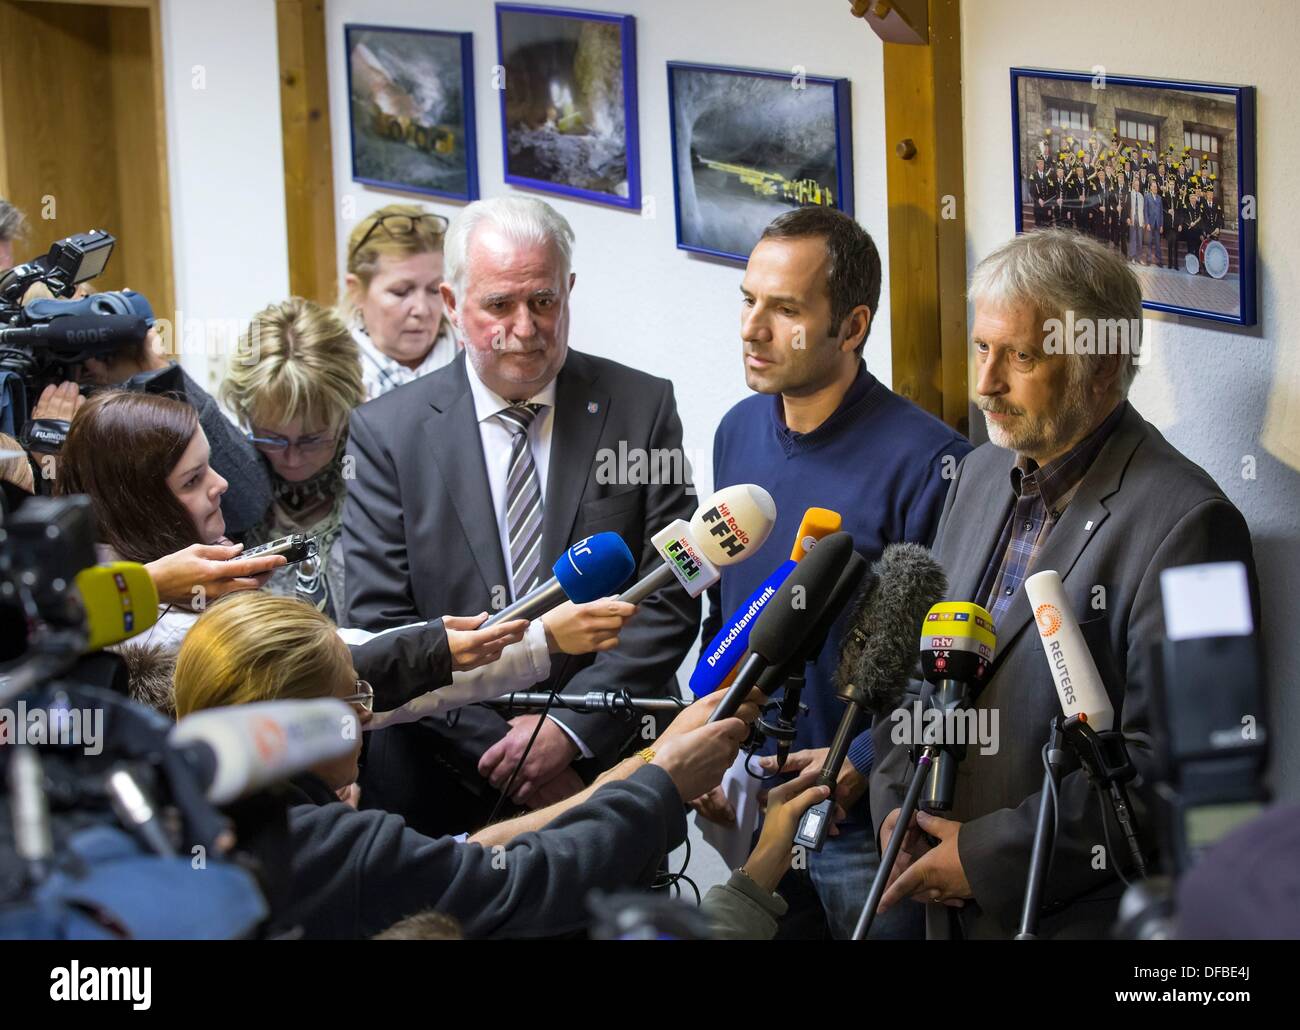 Unterbreizbach, Germany. 01st Oct, 2013. Environment minister of Thuringia Juergen Reinholz (L-R), K S press spokesman Michael Wudonig and Rainer Gerling, factory manager of the Werra Factory, talks during a press conference about the mining accident in Unterbreizbach, Germany, 01 October 2013. Photo: MICHAEL REICHEL/dpa/Alamy Live News Stock Photo